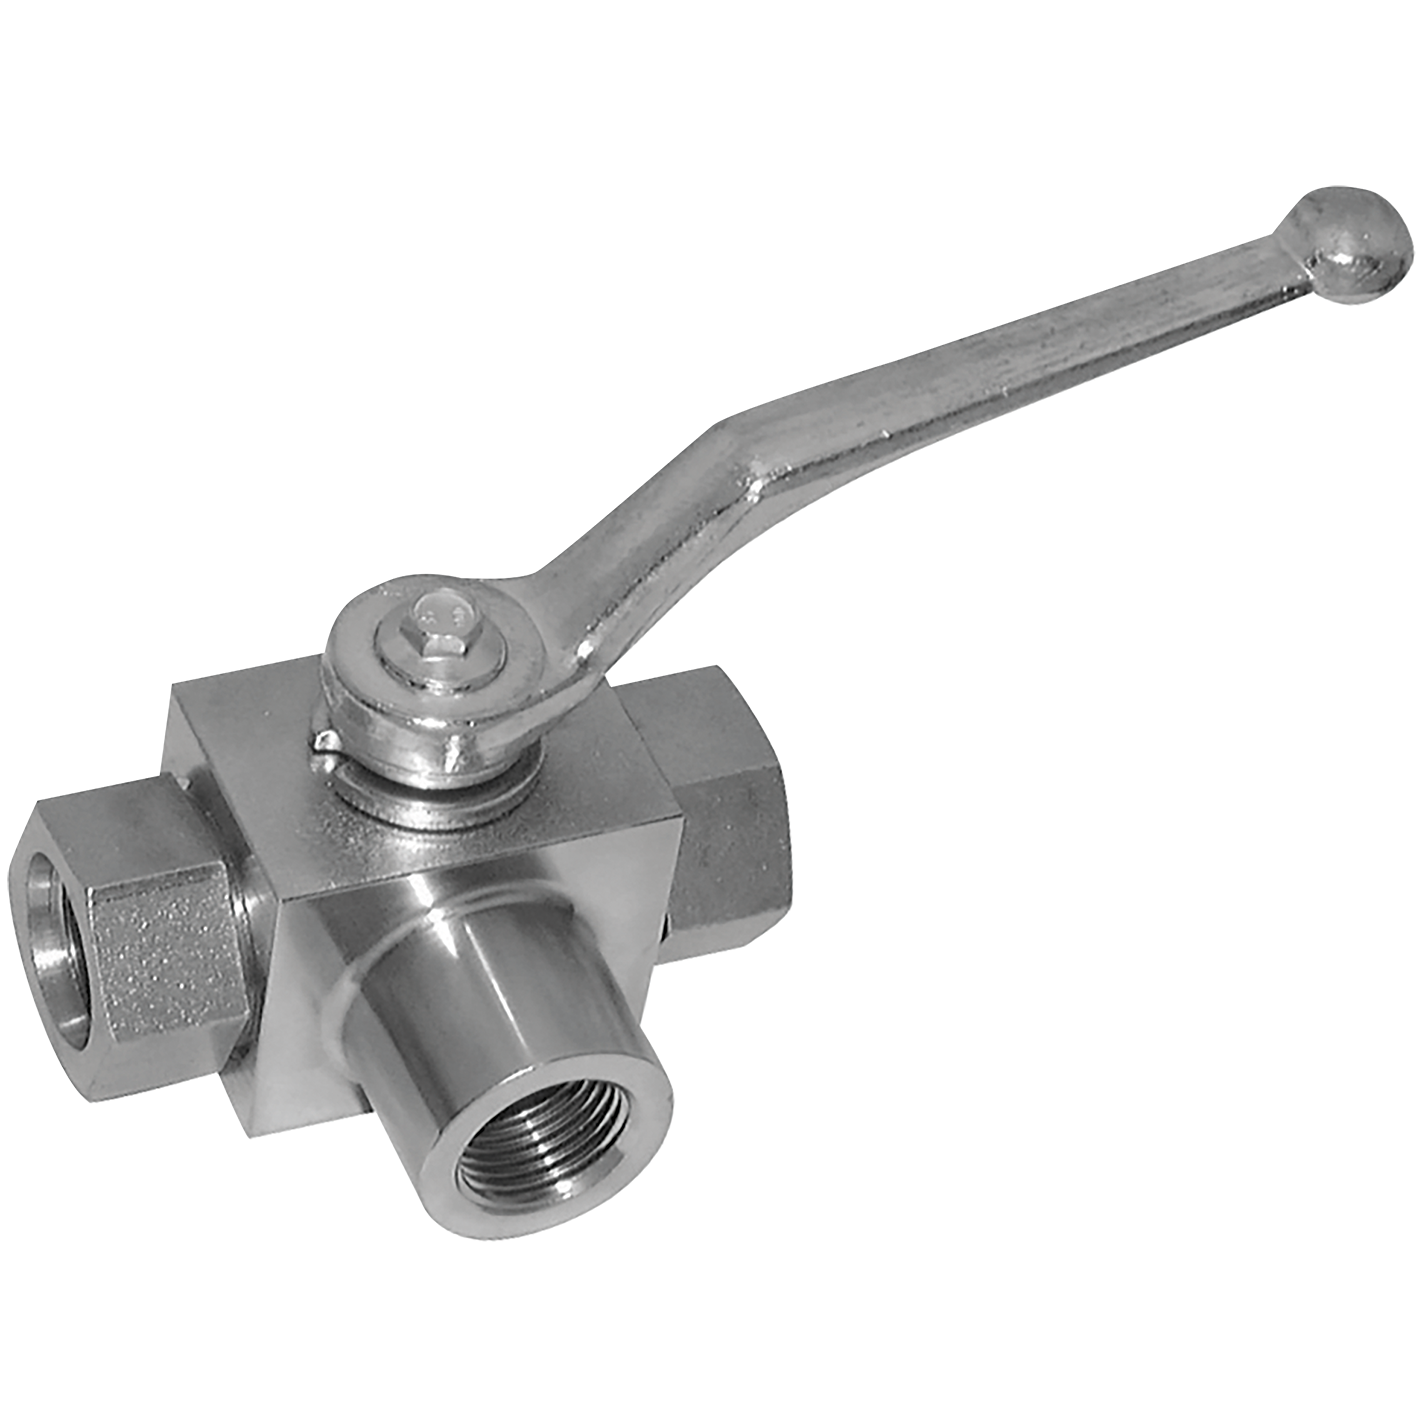 1/4" BSP Parallel Female 3 Way T Ported Ball Valve